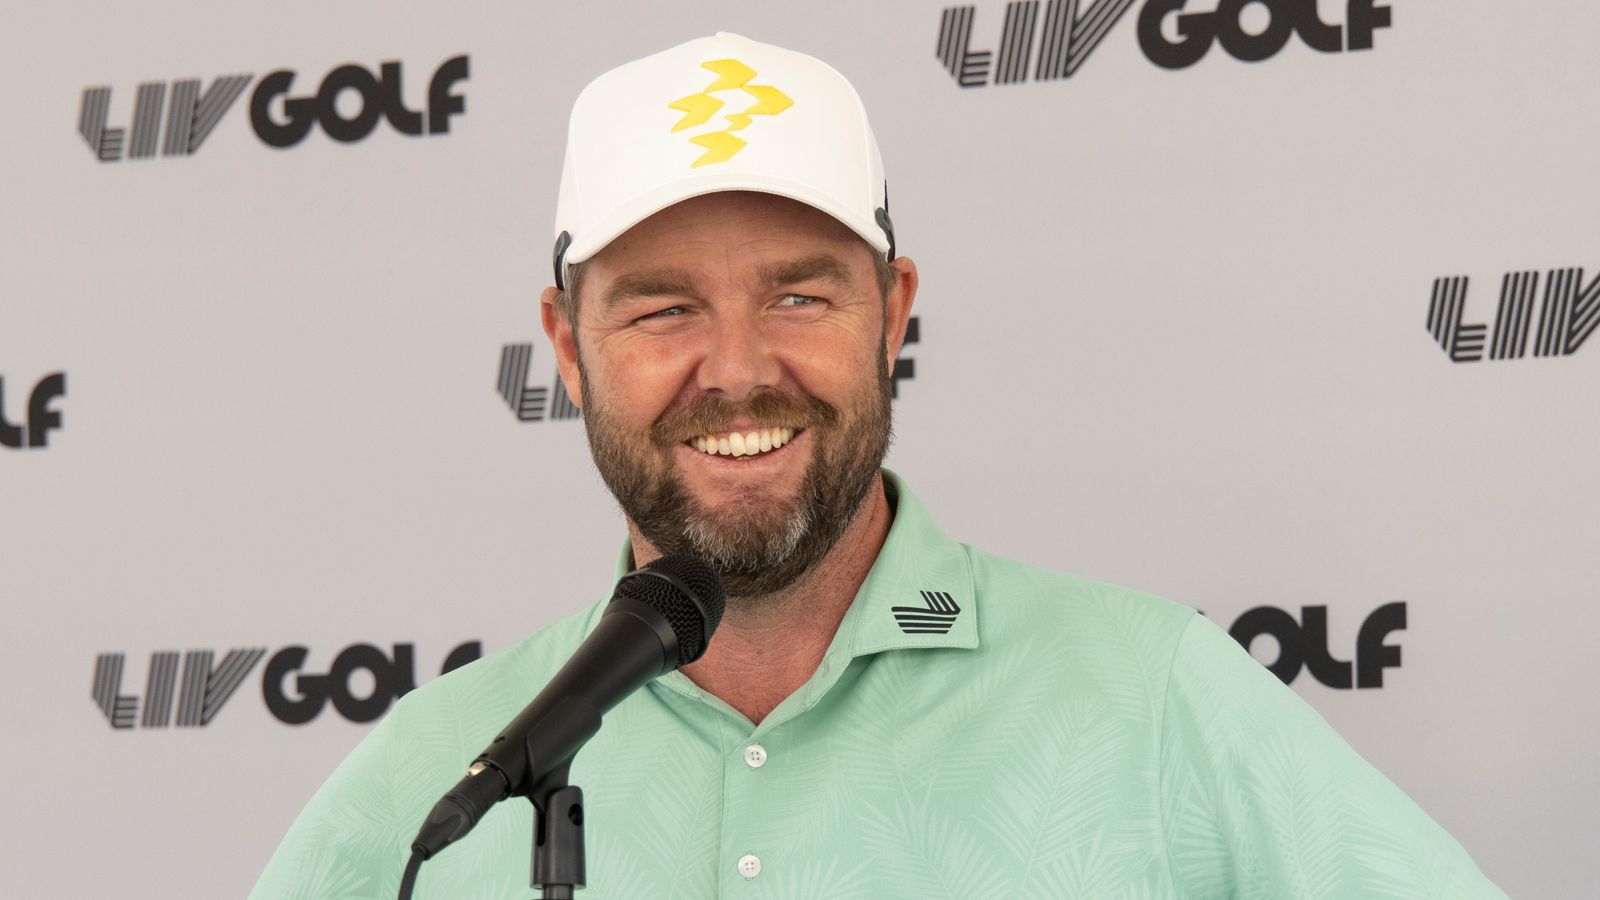 Marc Leishman leads after first-round at LIV Golf Tucson in Arizona